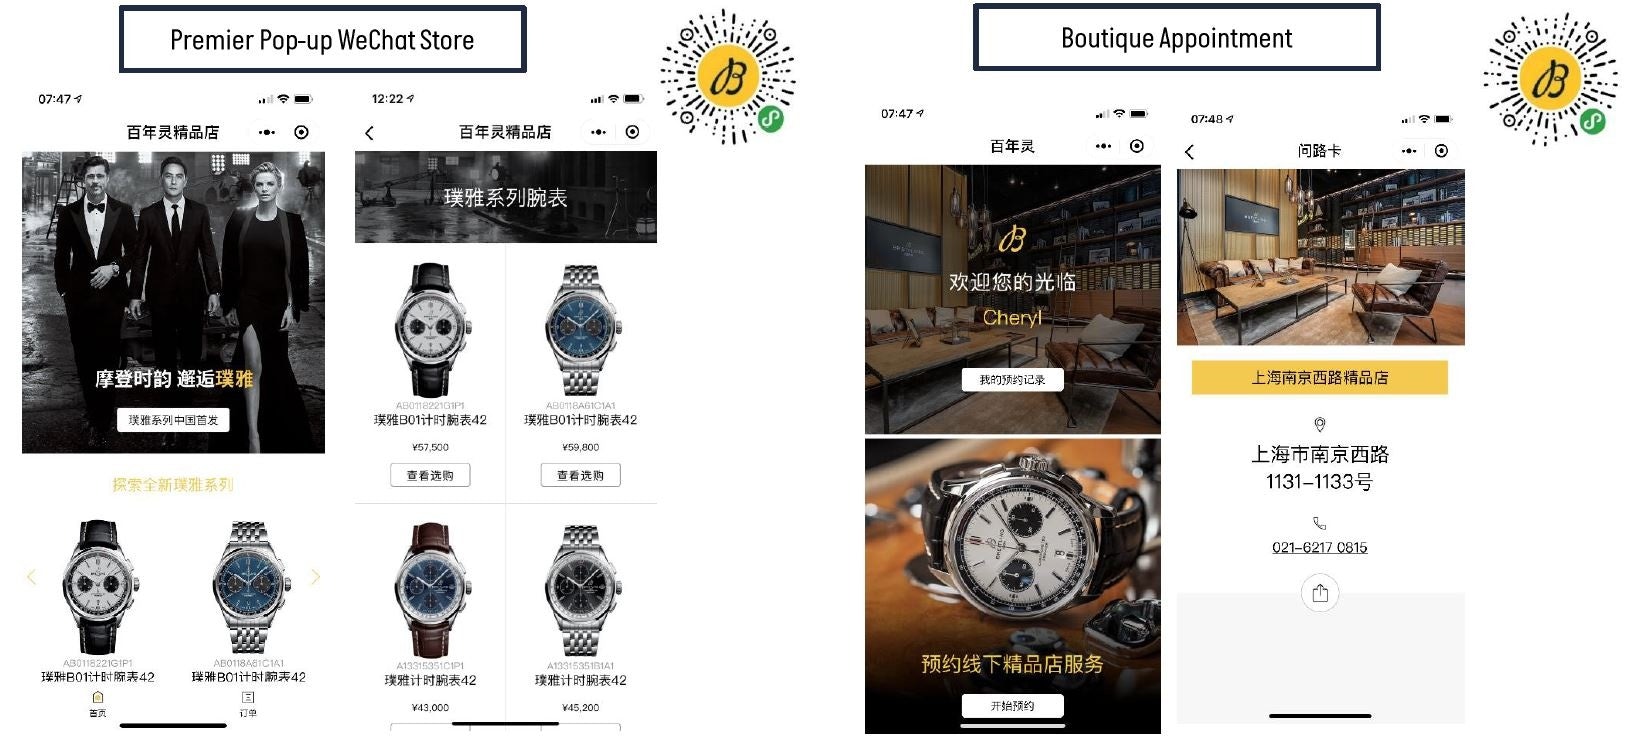 Breitling launched two mini-program services on WeChat, one is to promote the Premier collection and one is to take reservations from Chinese customers for appointments at offline stores. Courtesy image